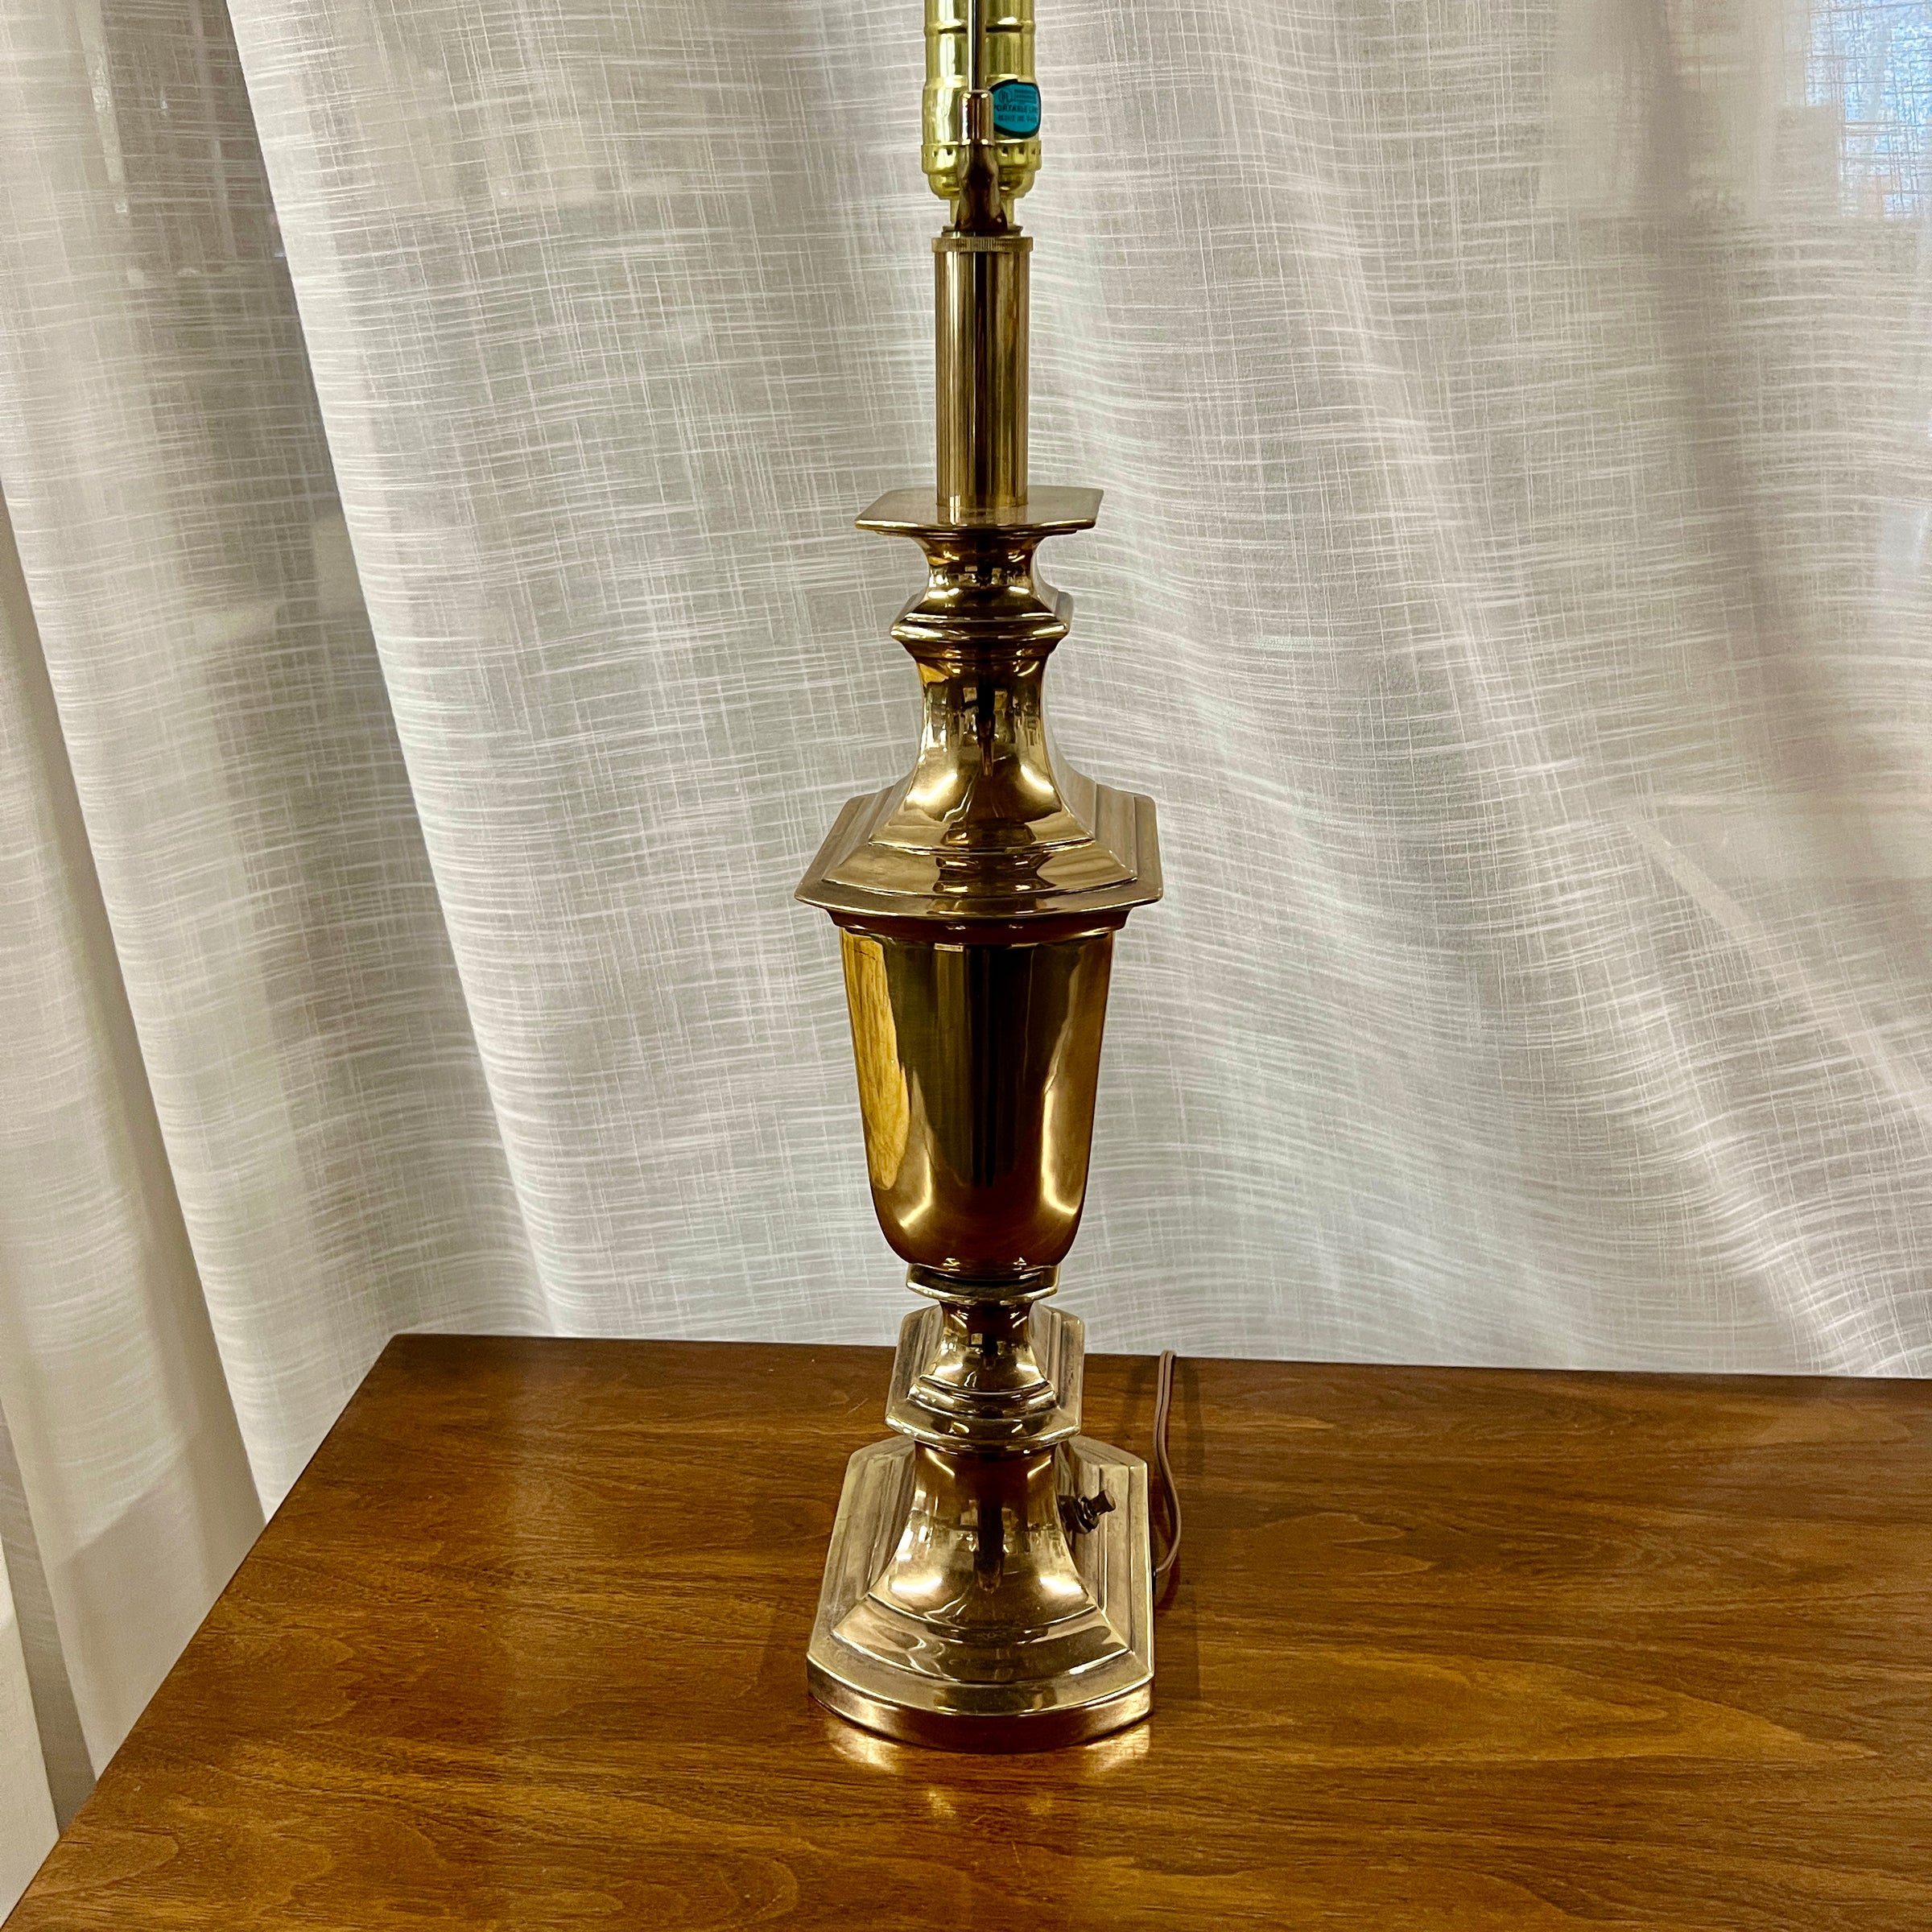 What is a Pair of Brass Lamps by Stiffel Worth? Price? Value?